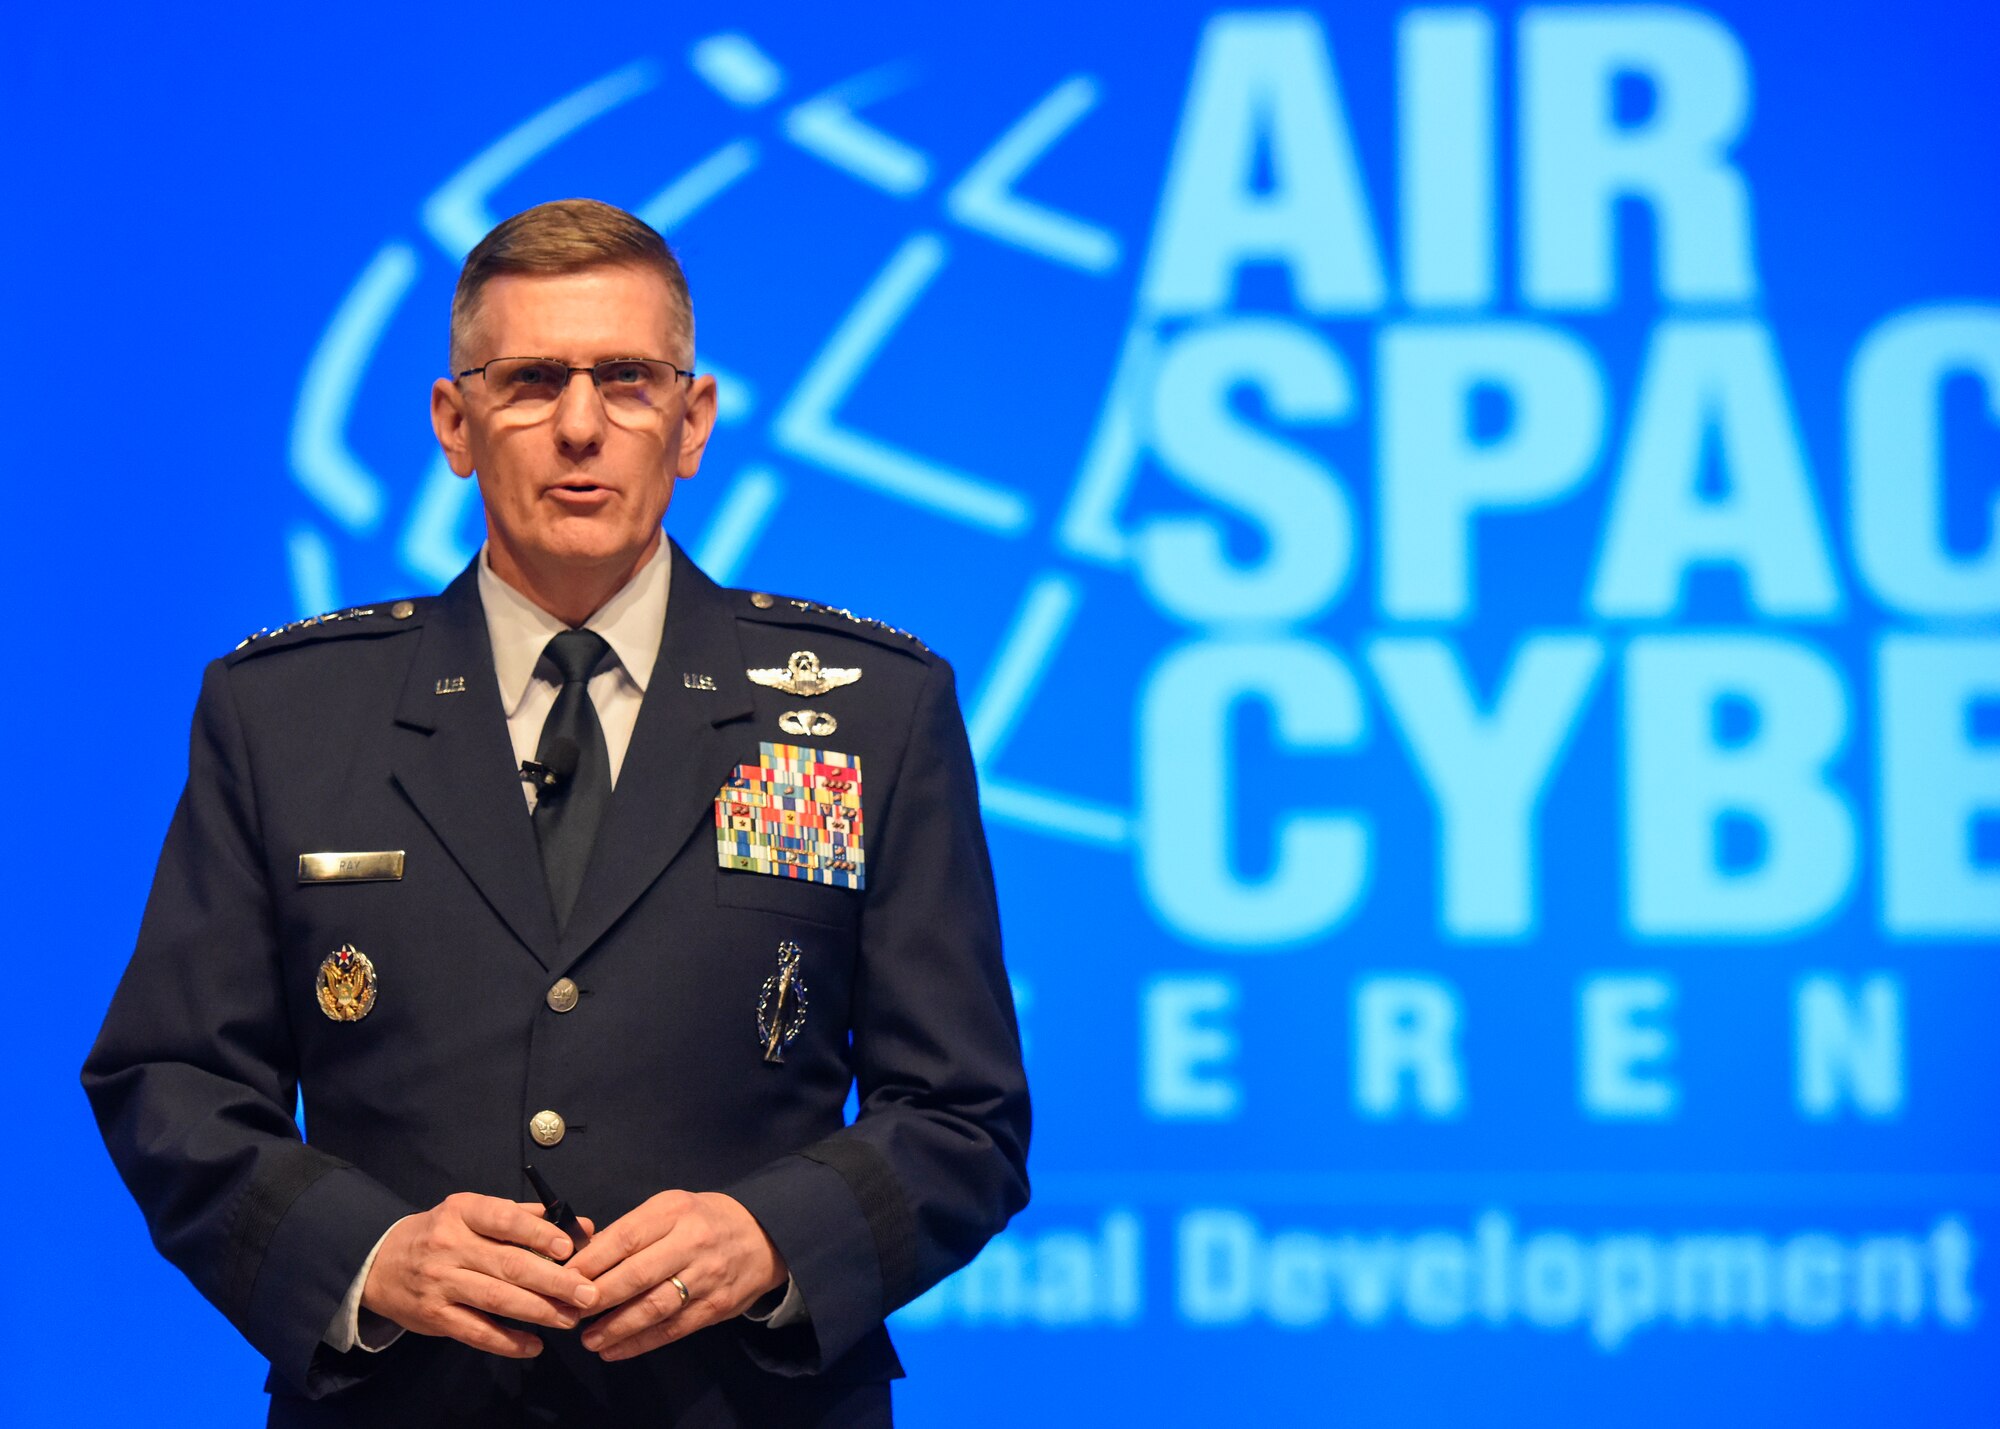 Gen. Timothy Ray, Air Force Global Strike Command commander, discusses “Global Strike – The Critical Competitive Edge” during the Air Force Association Air, Space and Cyber Conference in National Harbor, Md., Sept. 17, 2019. The ASC Conference is a professional development seminar that offers the opportunity for Department of Defense personnel to participate in forums, speeches and workshops. (U.S. Air Force photo by Staff Sgt. Jeremy L. Mosier)